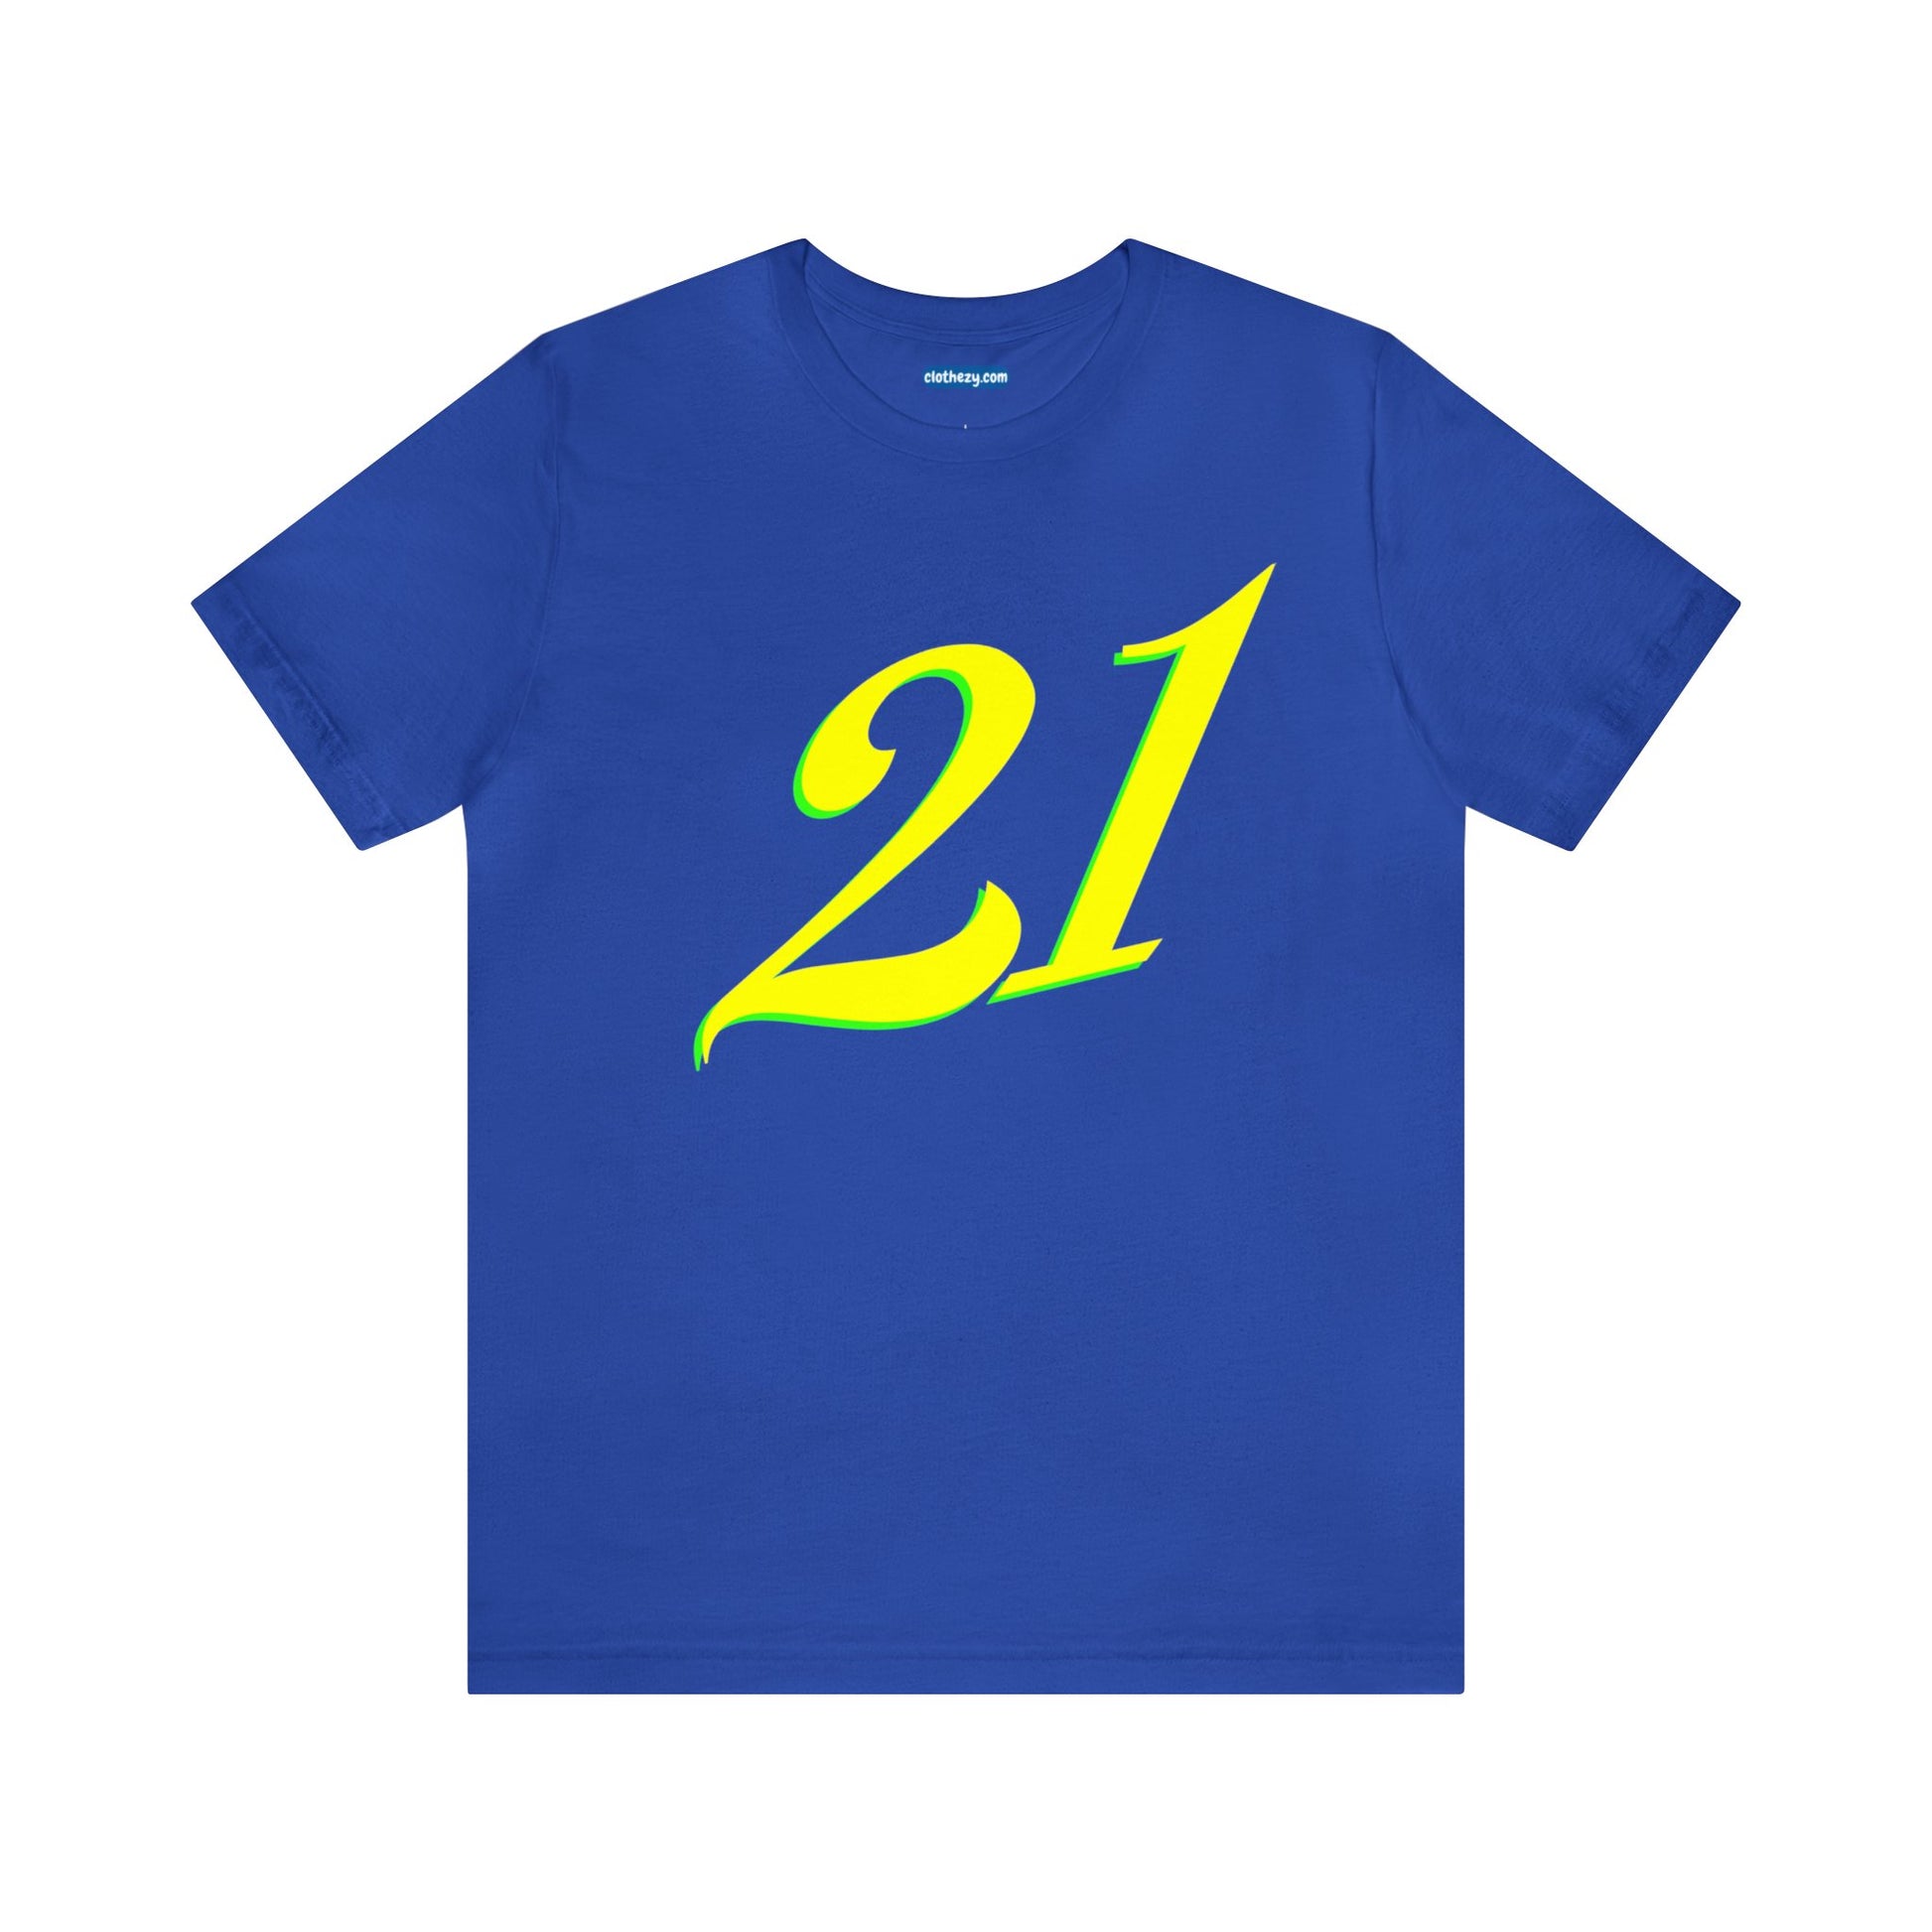 Number 21 Design - Soft Cotton Tee for birthdays and celebrations, Gift for friends and family, Multiple Options by clothezy.com in Royal Blue Size Small - Buy Now